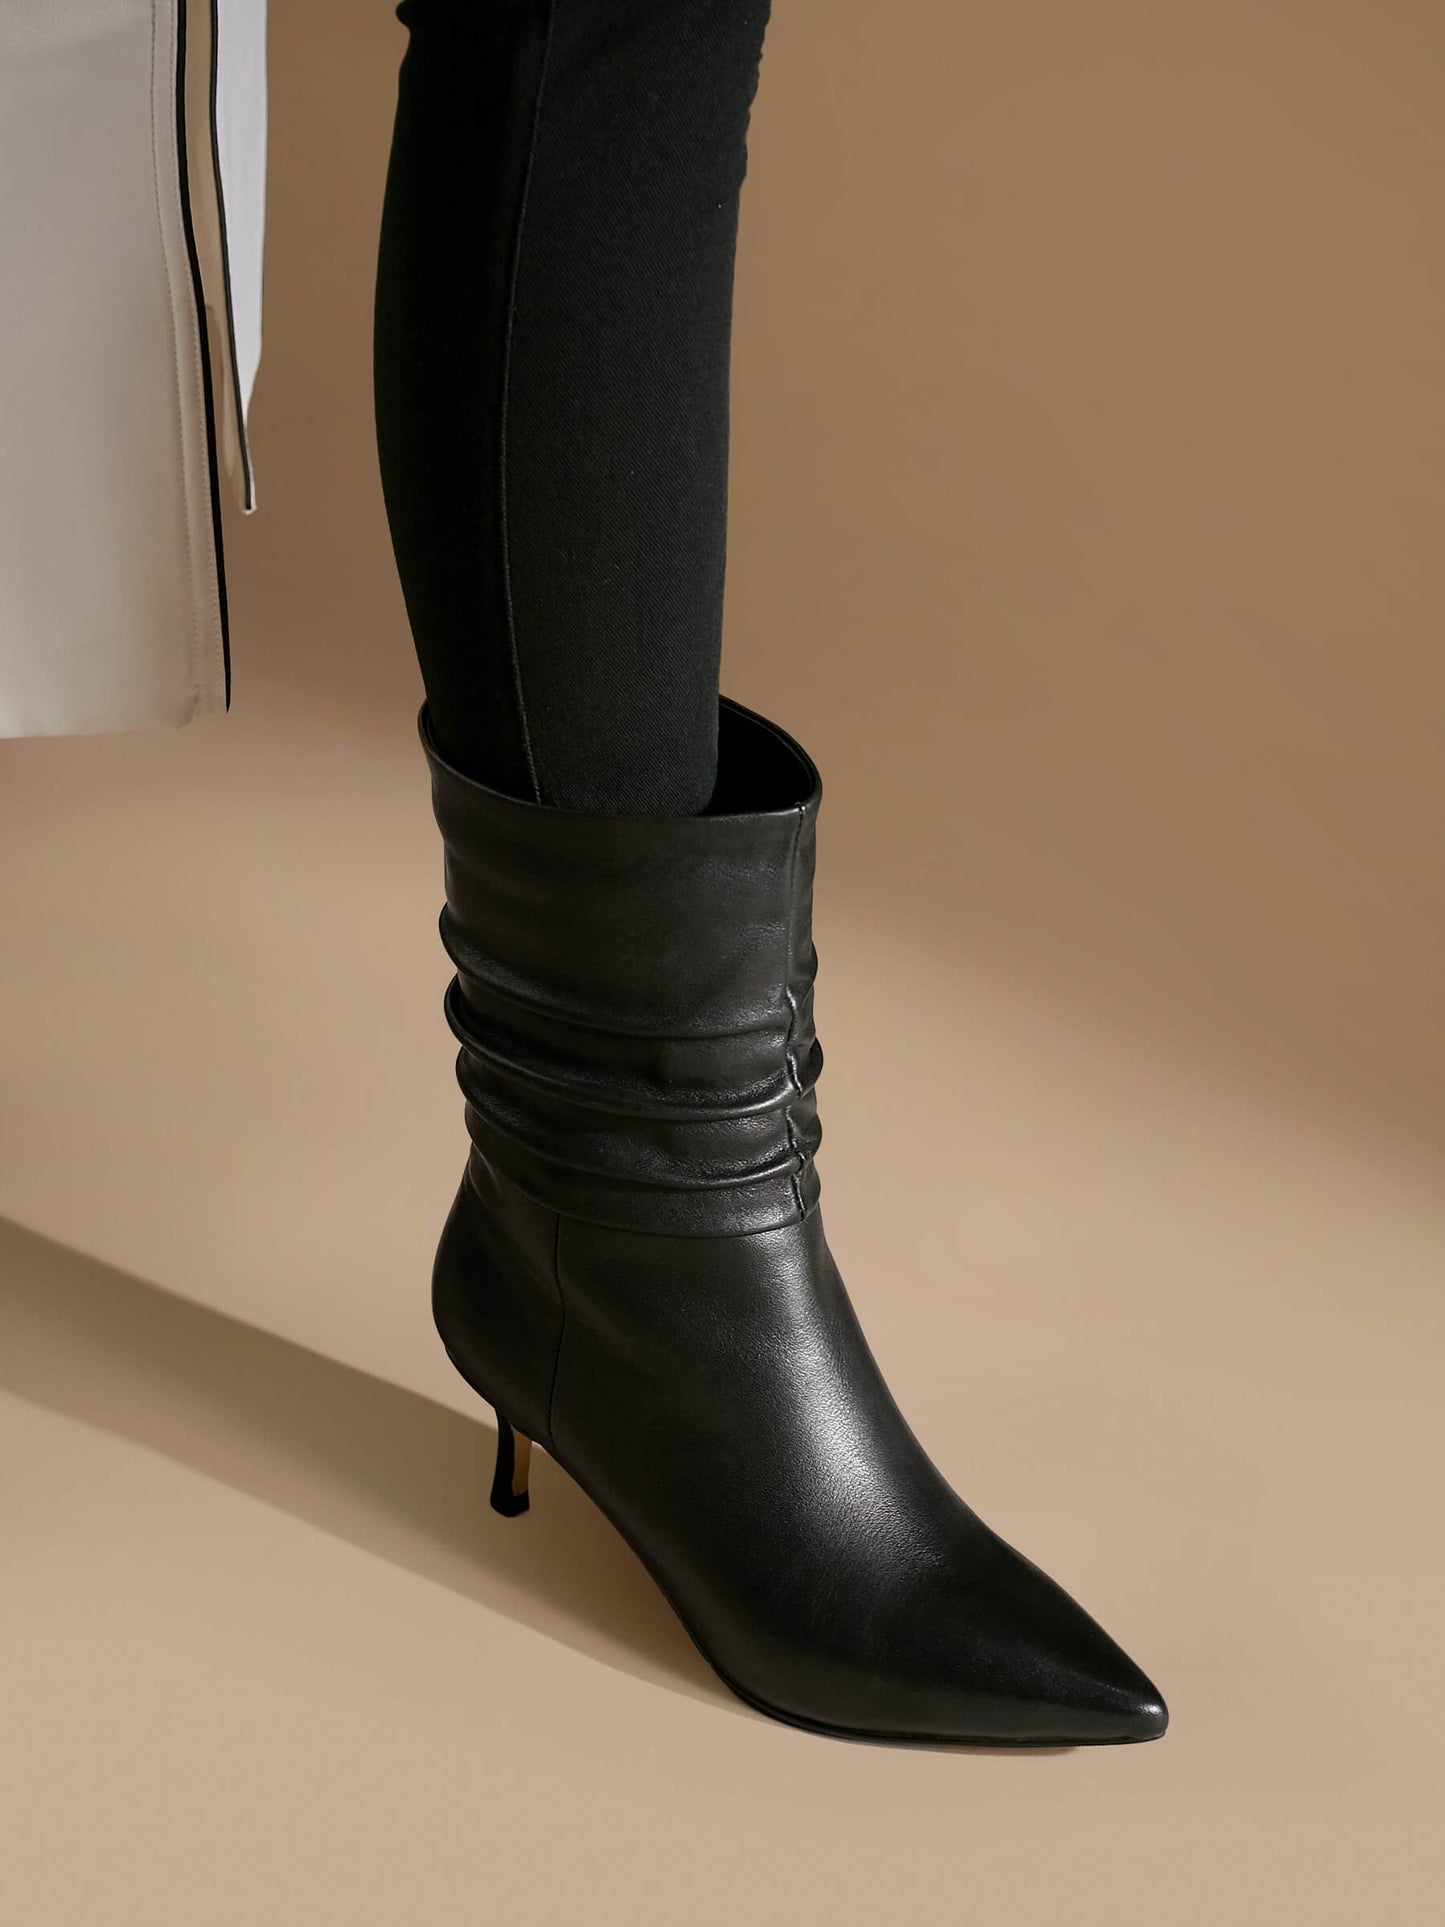 ROLISA-Milo-Slouchy-Ruched-Leather-Kitten-Heels-Mid-Calf-Boots-Black-Model